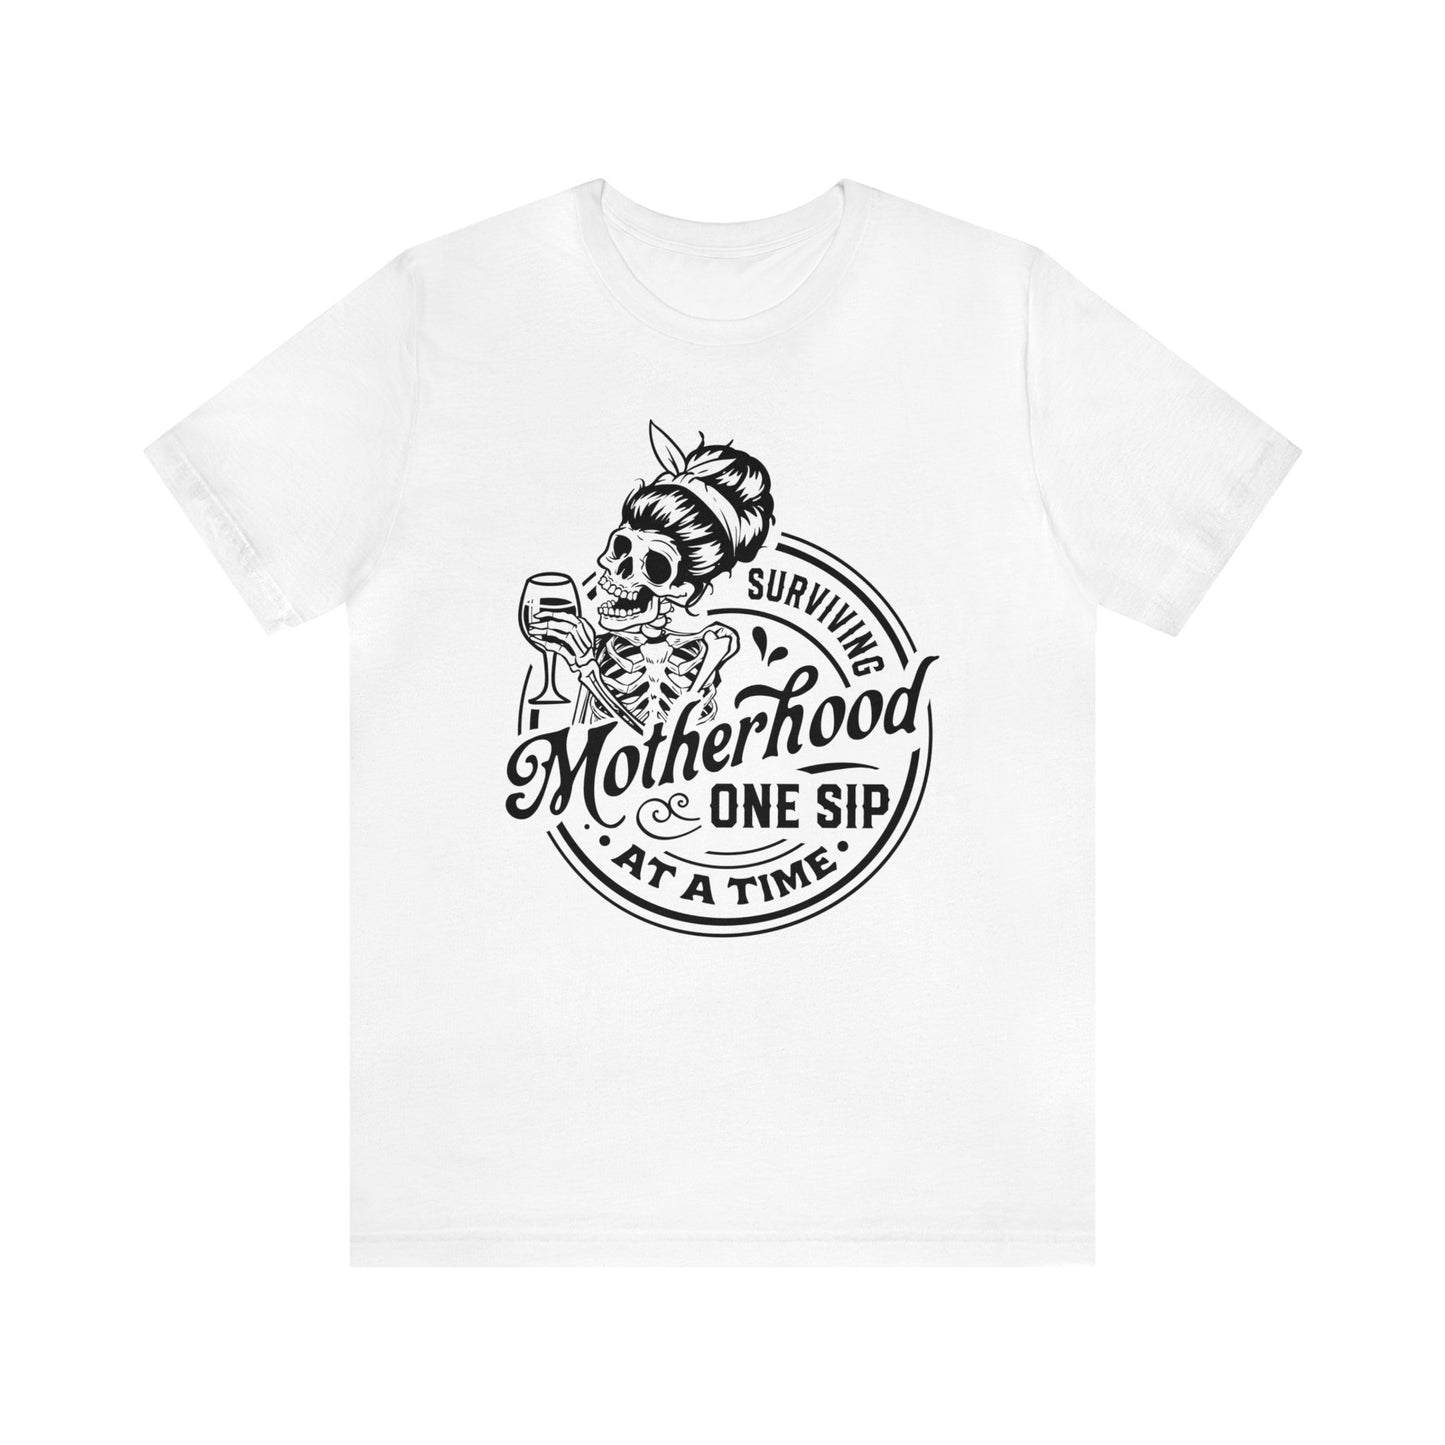 Surviving Motherhood T-Shirt For Mother's Day T Shirt For Mom TShirt For Wine Lovers Gift